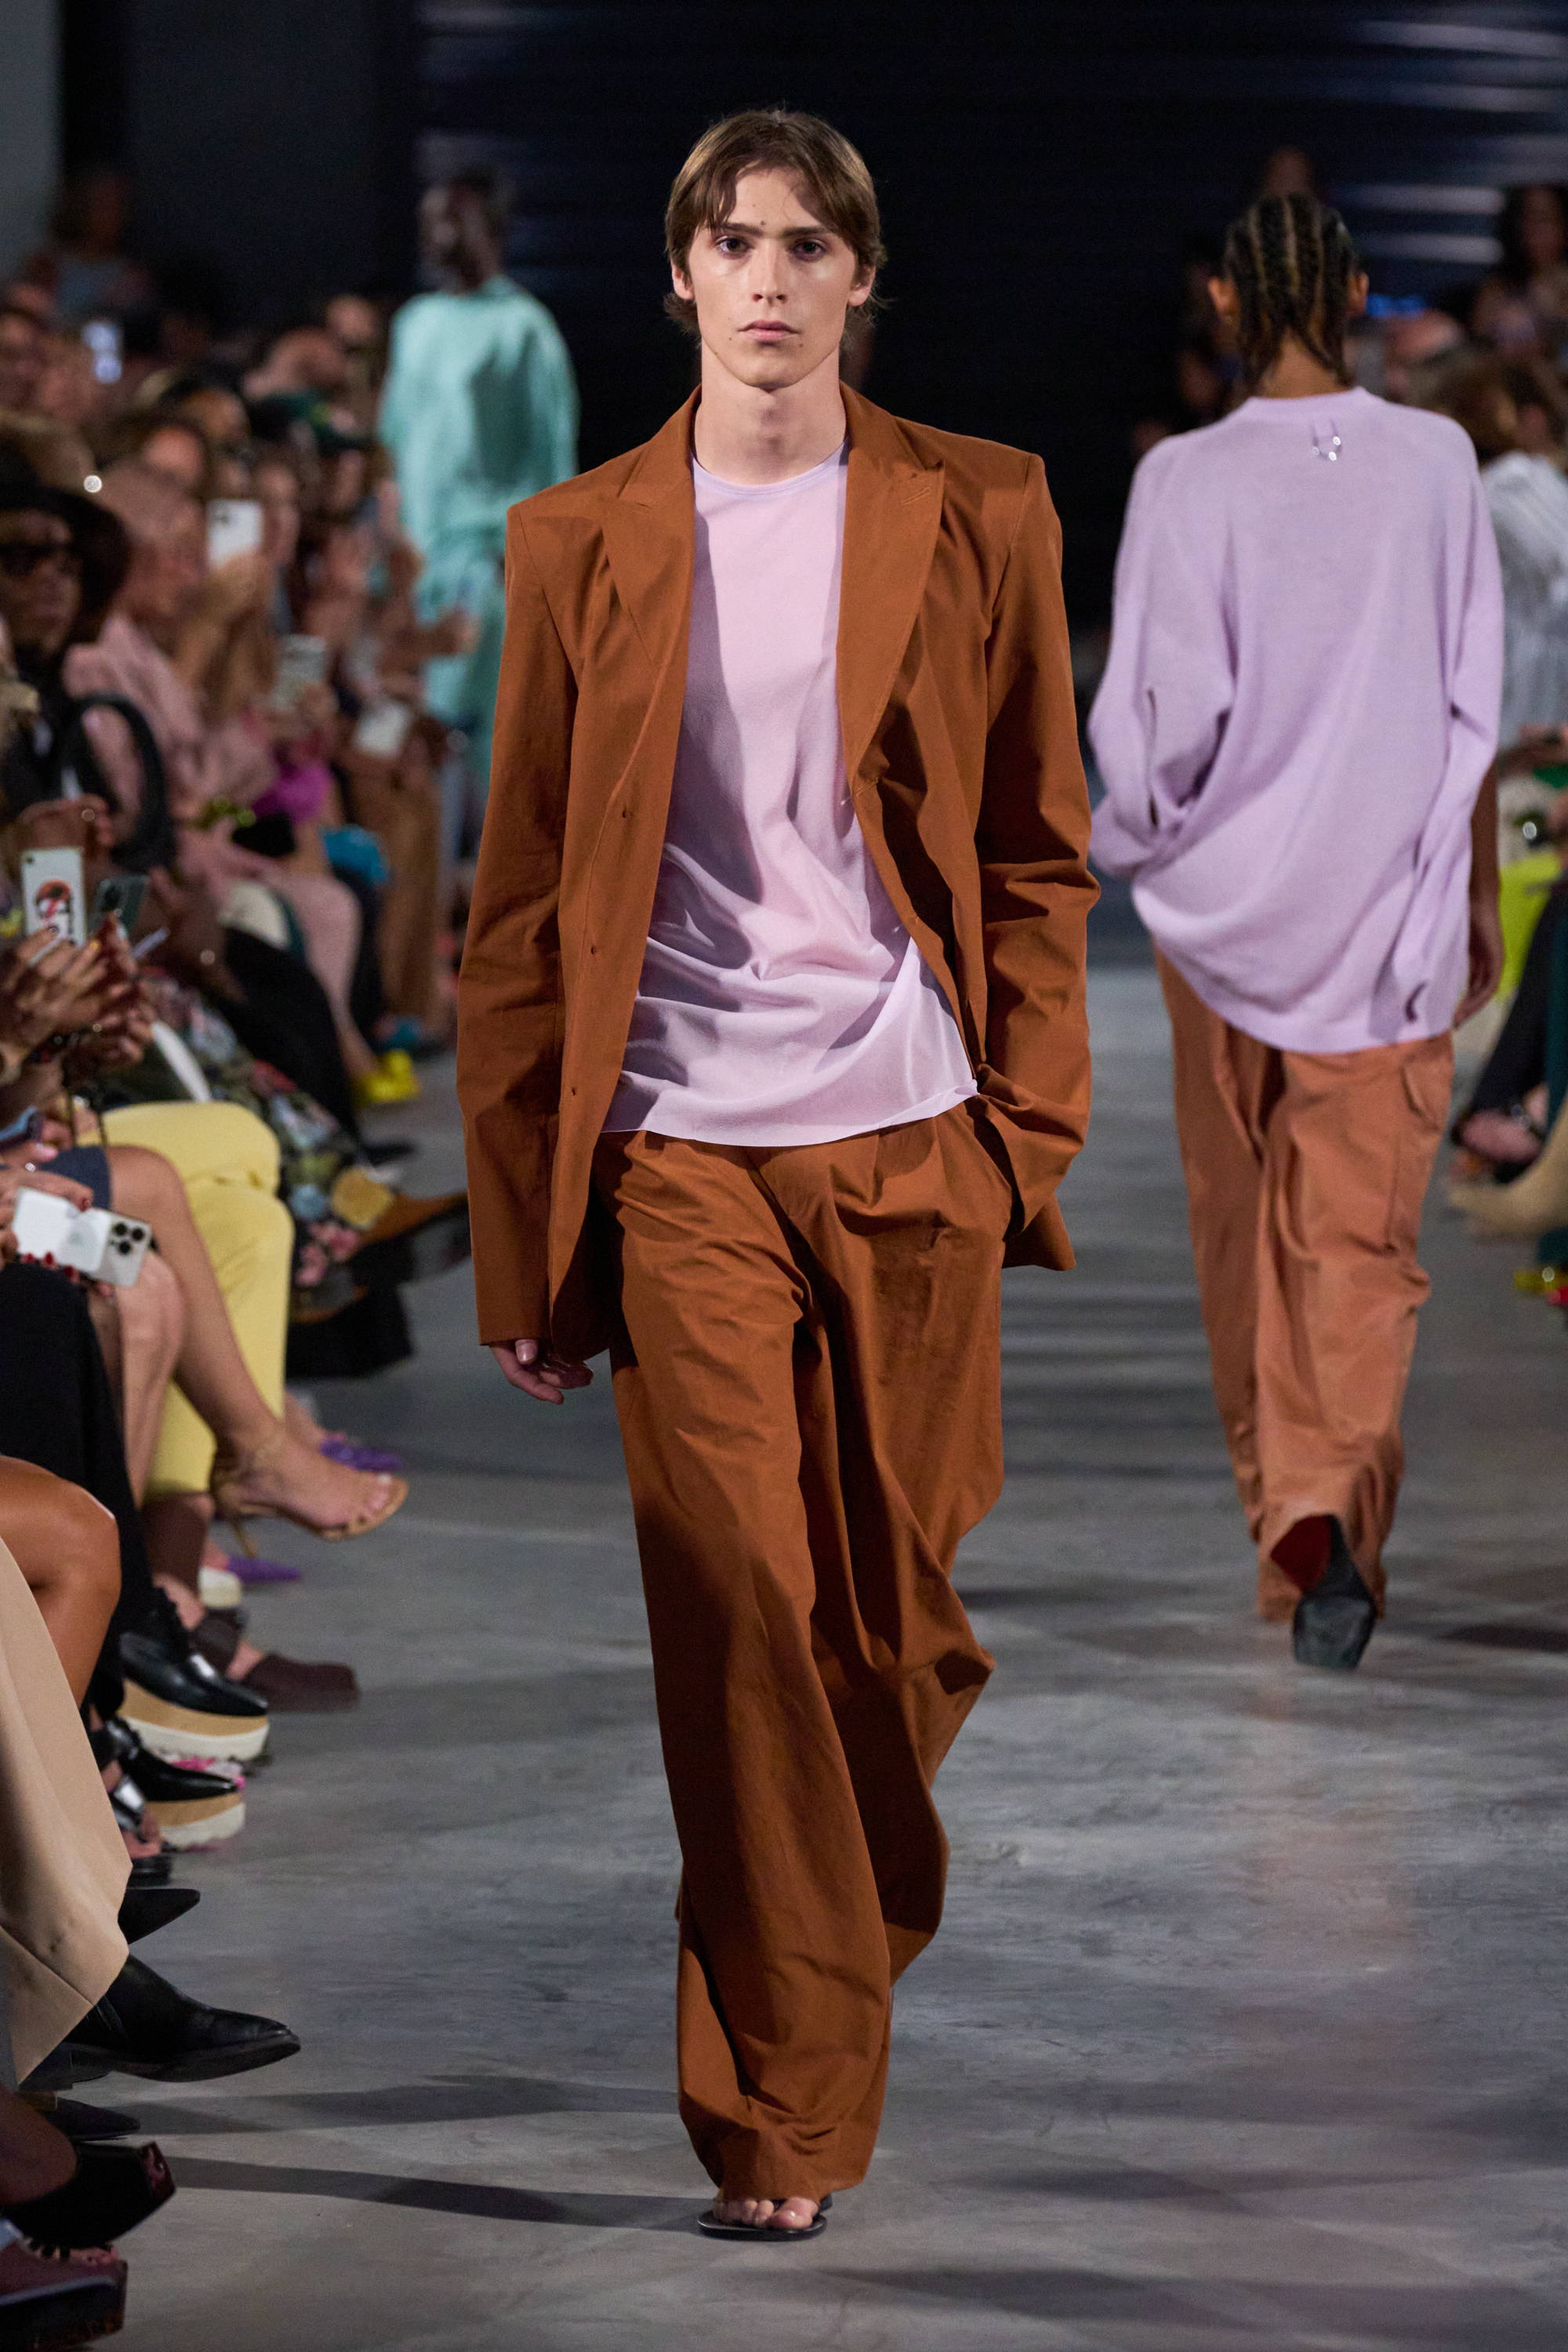 Model on a runway wearing suit and sheer top